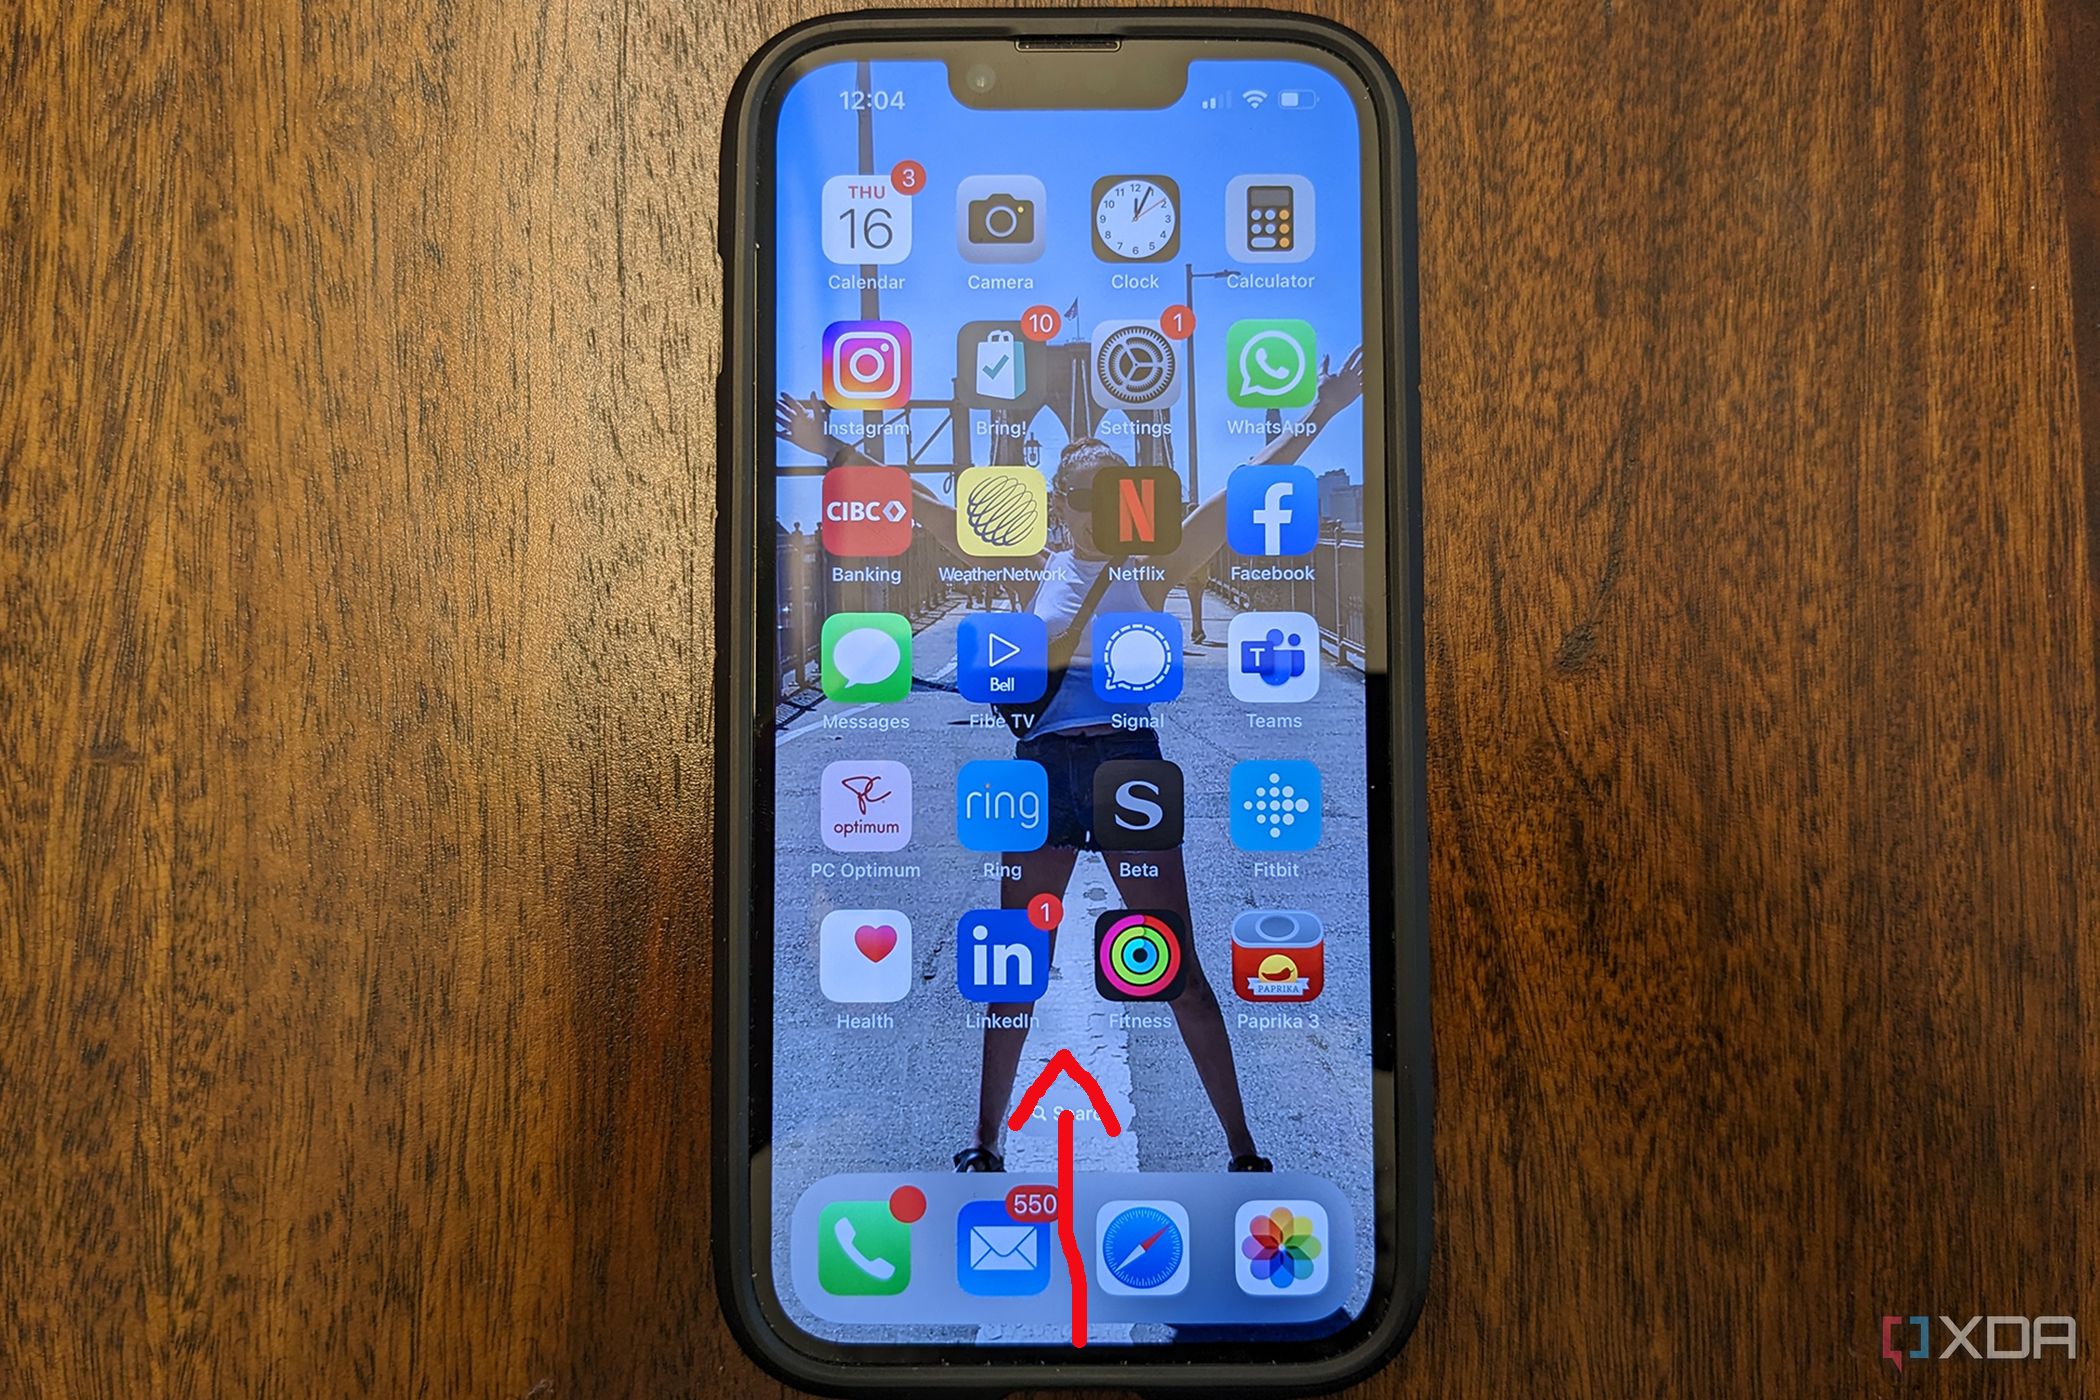 iphone gestures home screen go back home